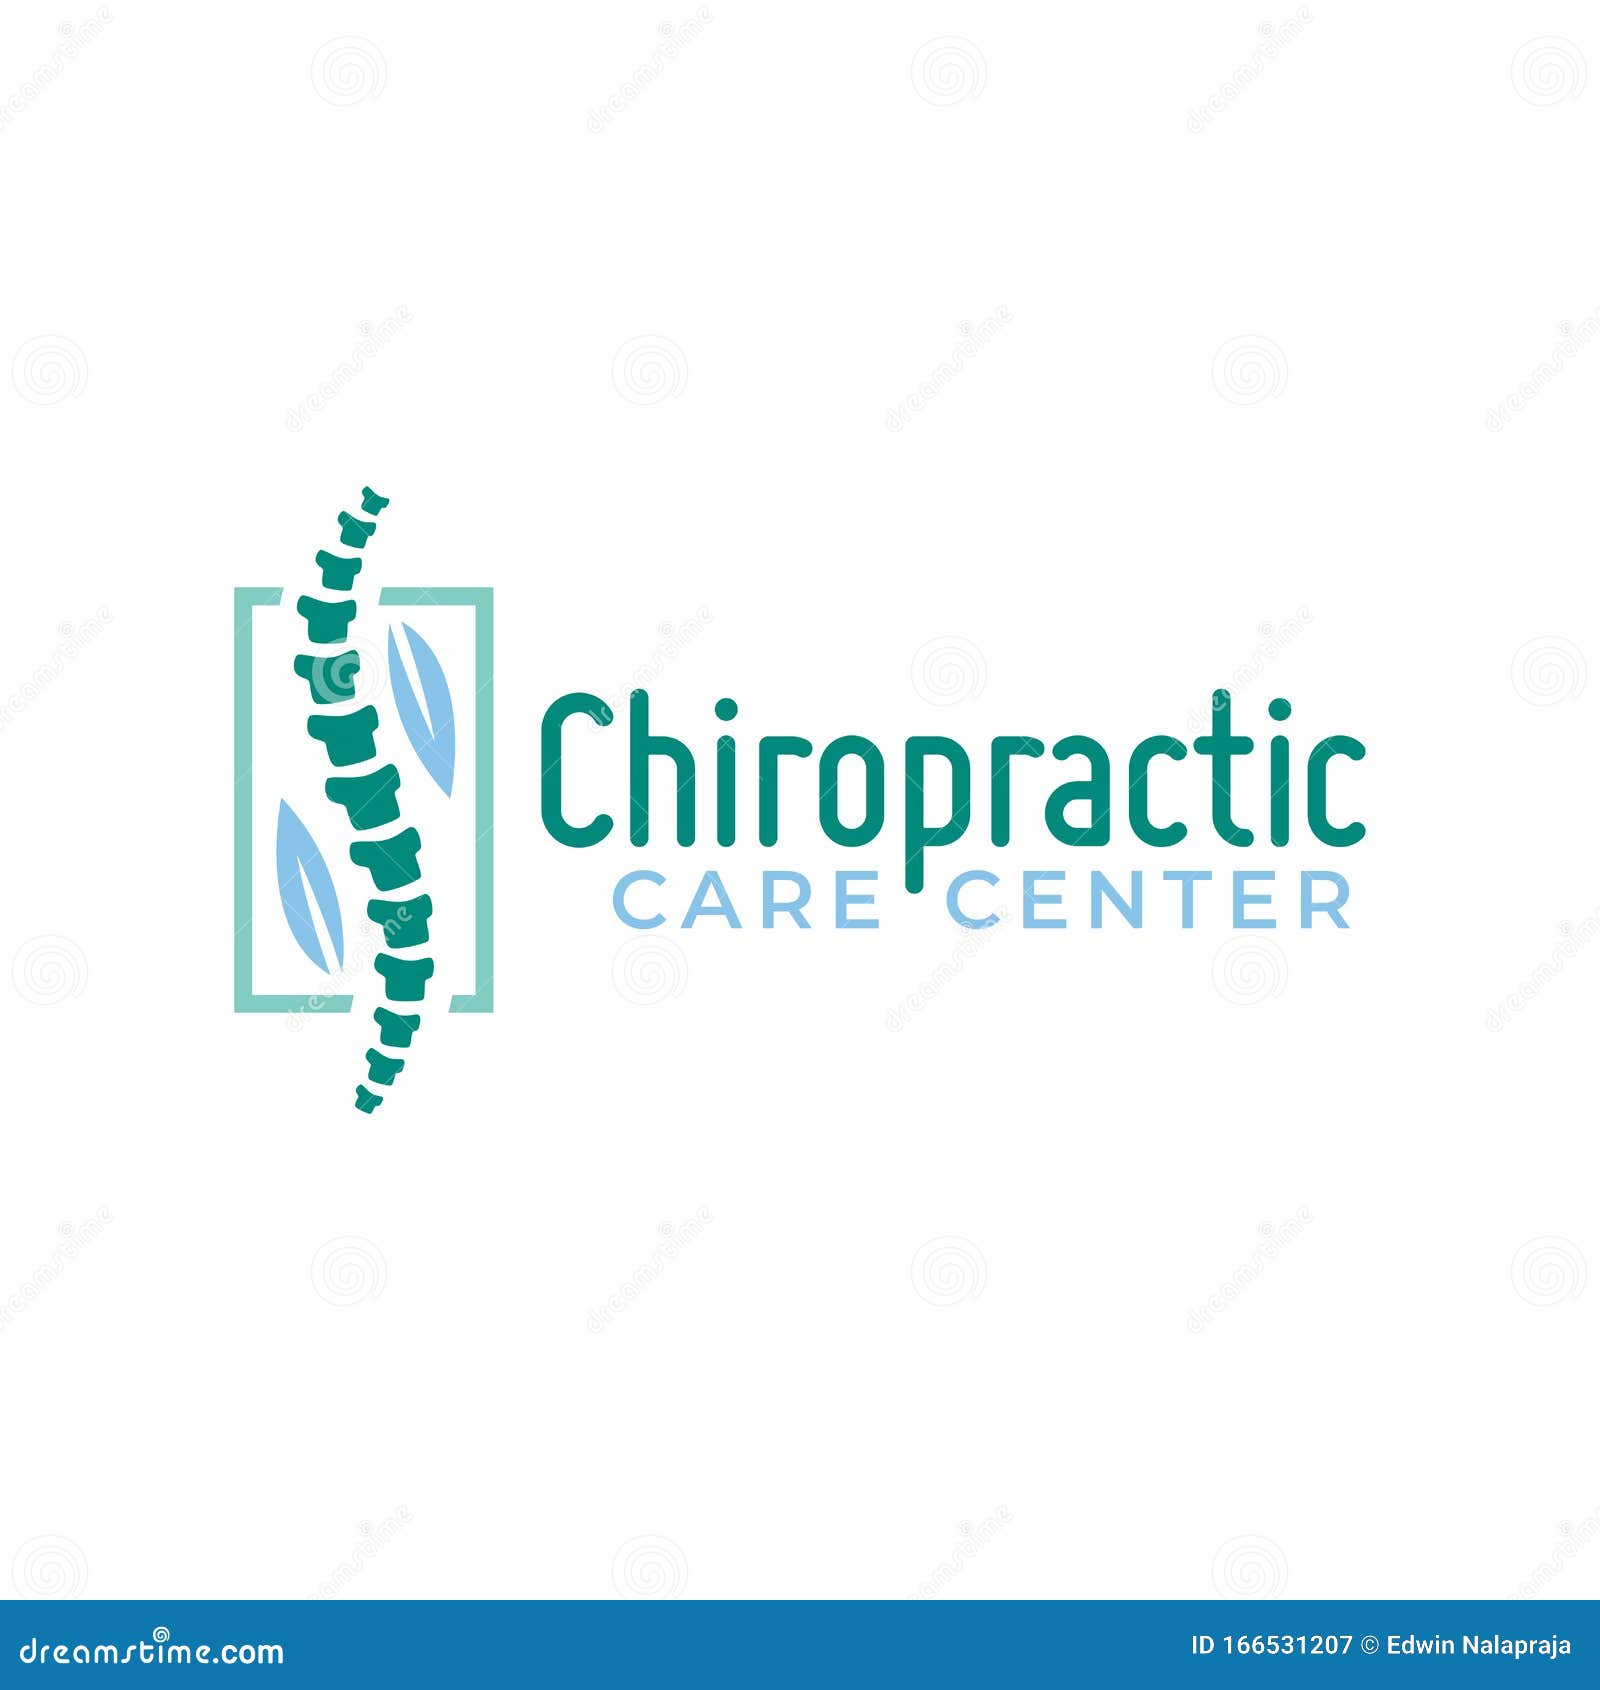 Chiropractic Logo Vector, Spine Health Care Medical Symbol or Icon Inside Chiropractic Travel Card Template